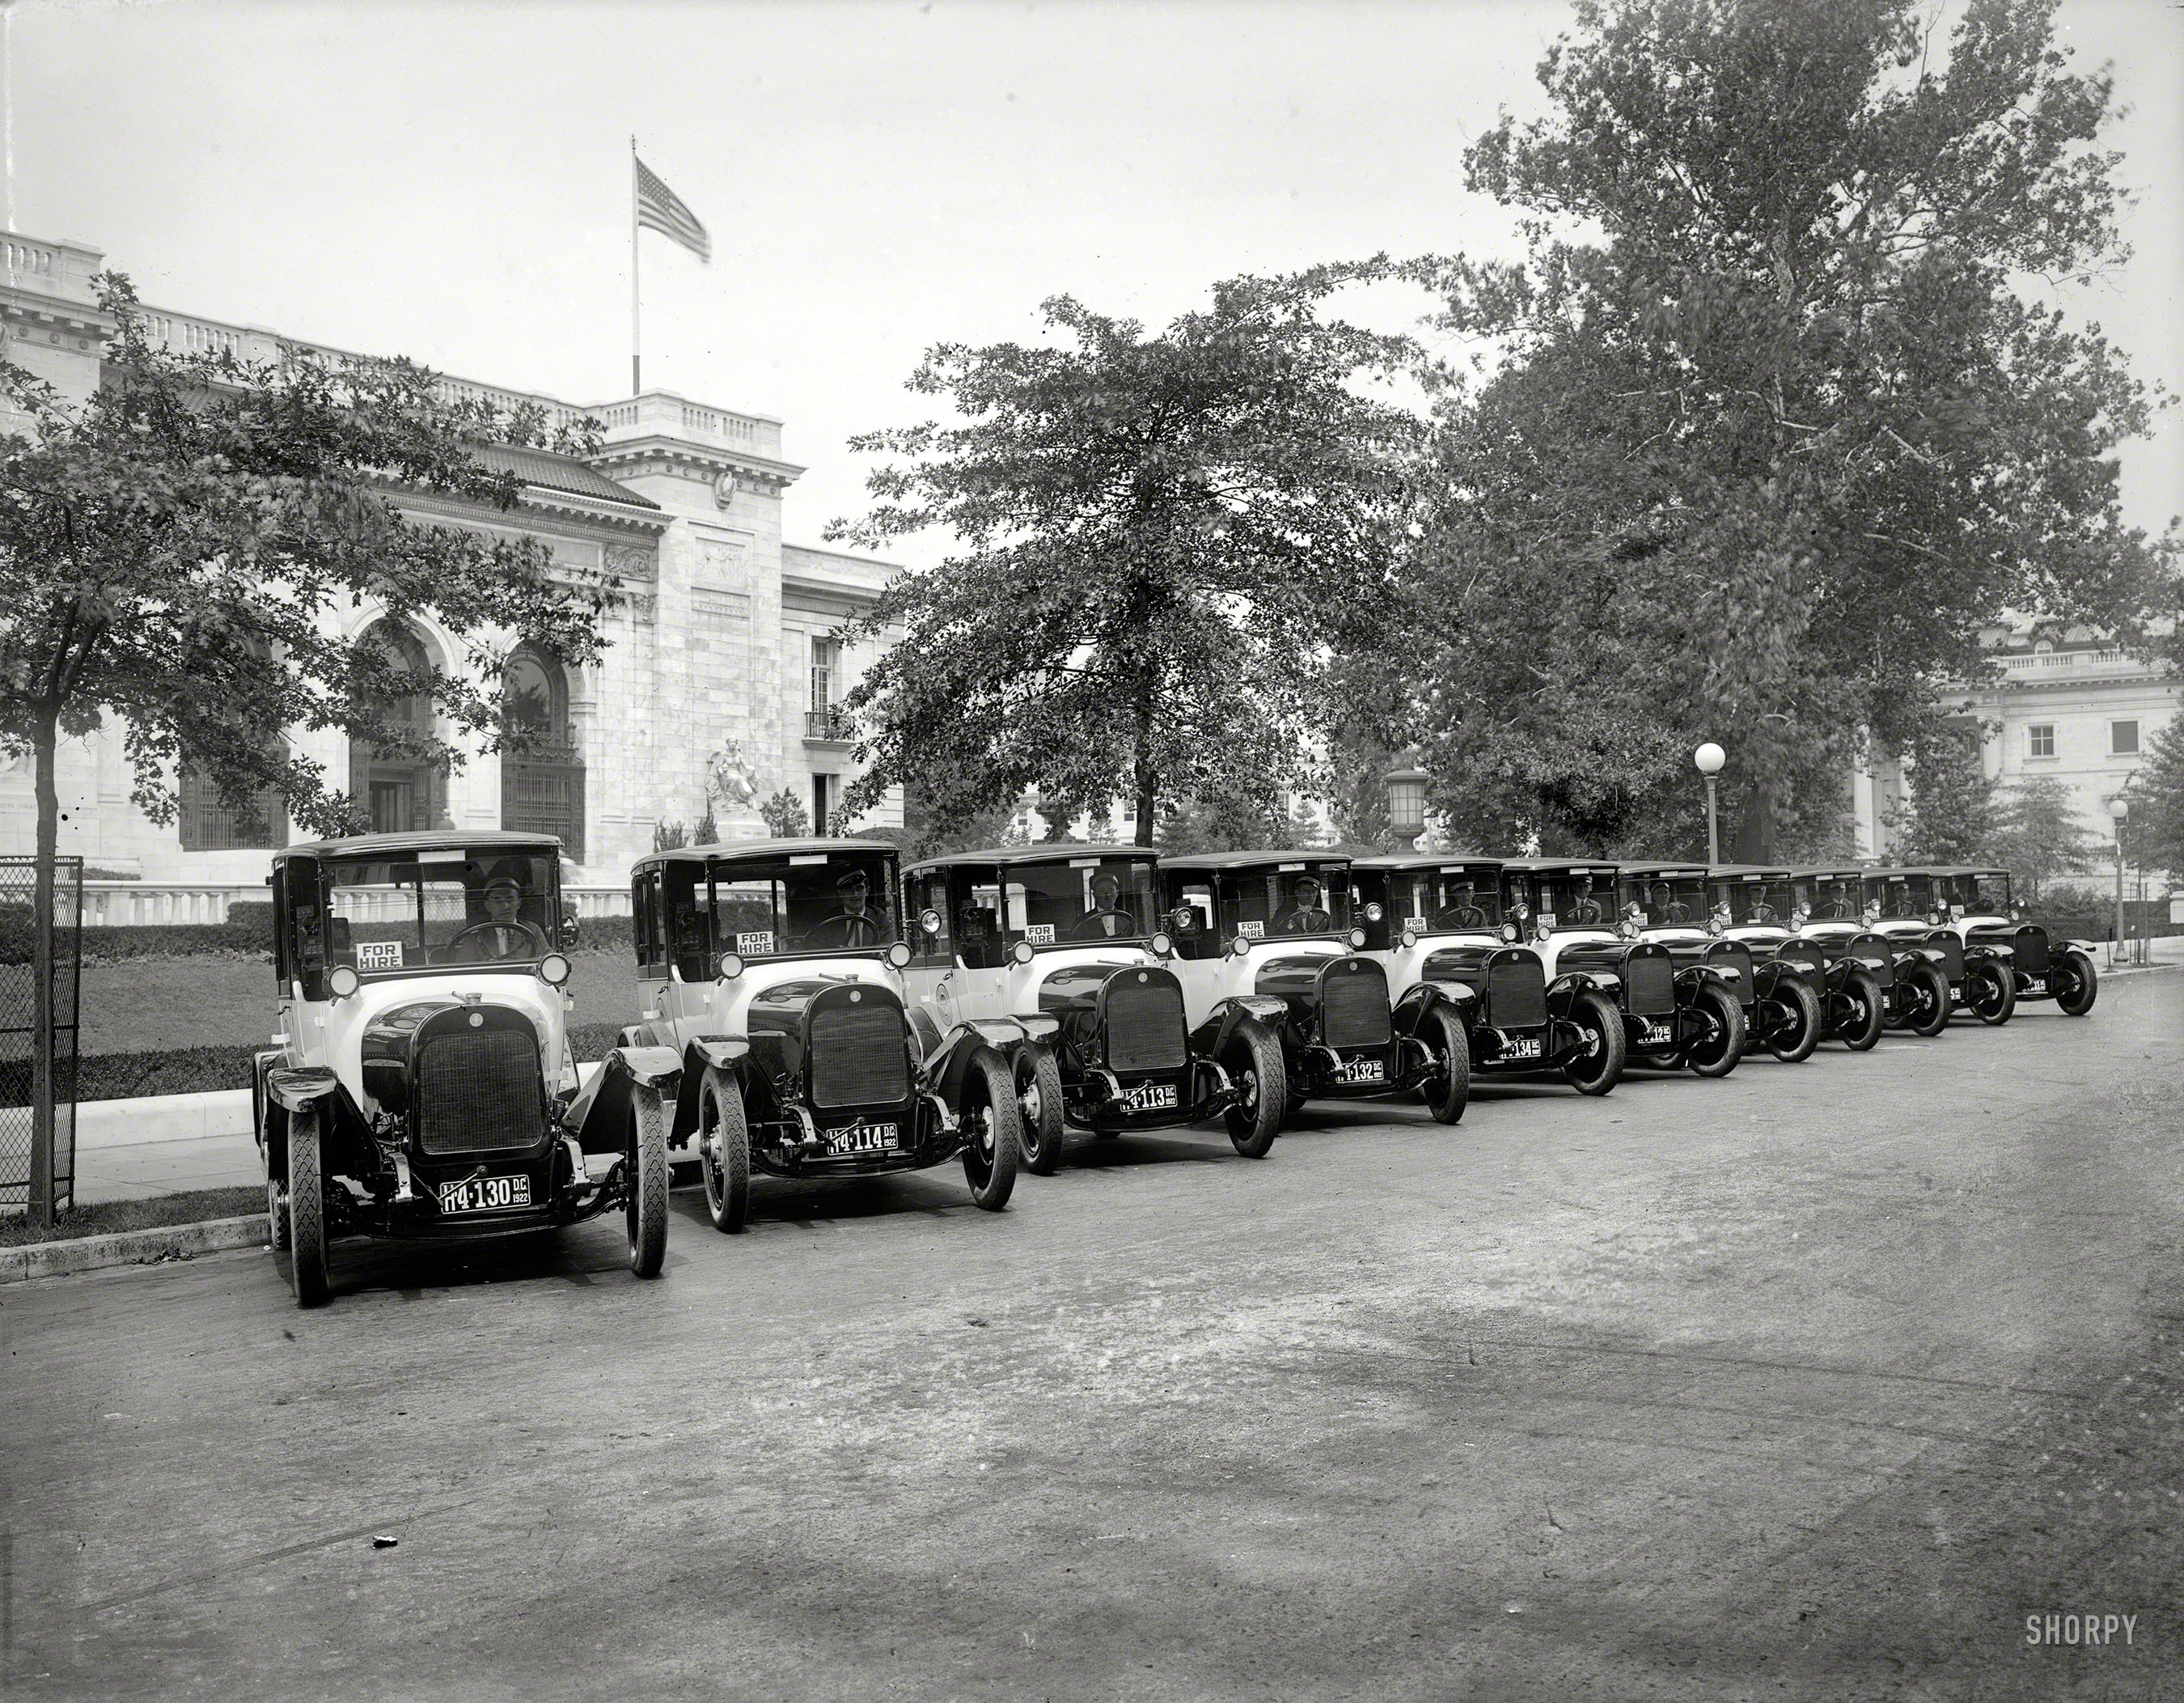 Washington, D.C., 1922. "Black & White taxis at Pan American Union." National Photo Company Collection glass negative. View full size.